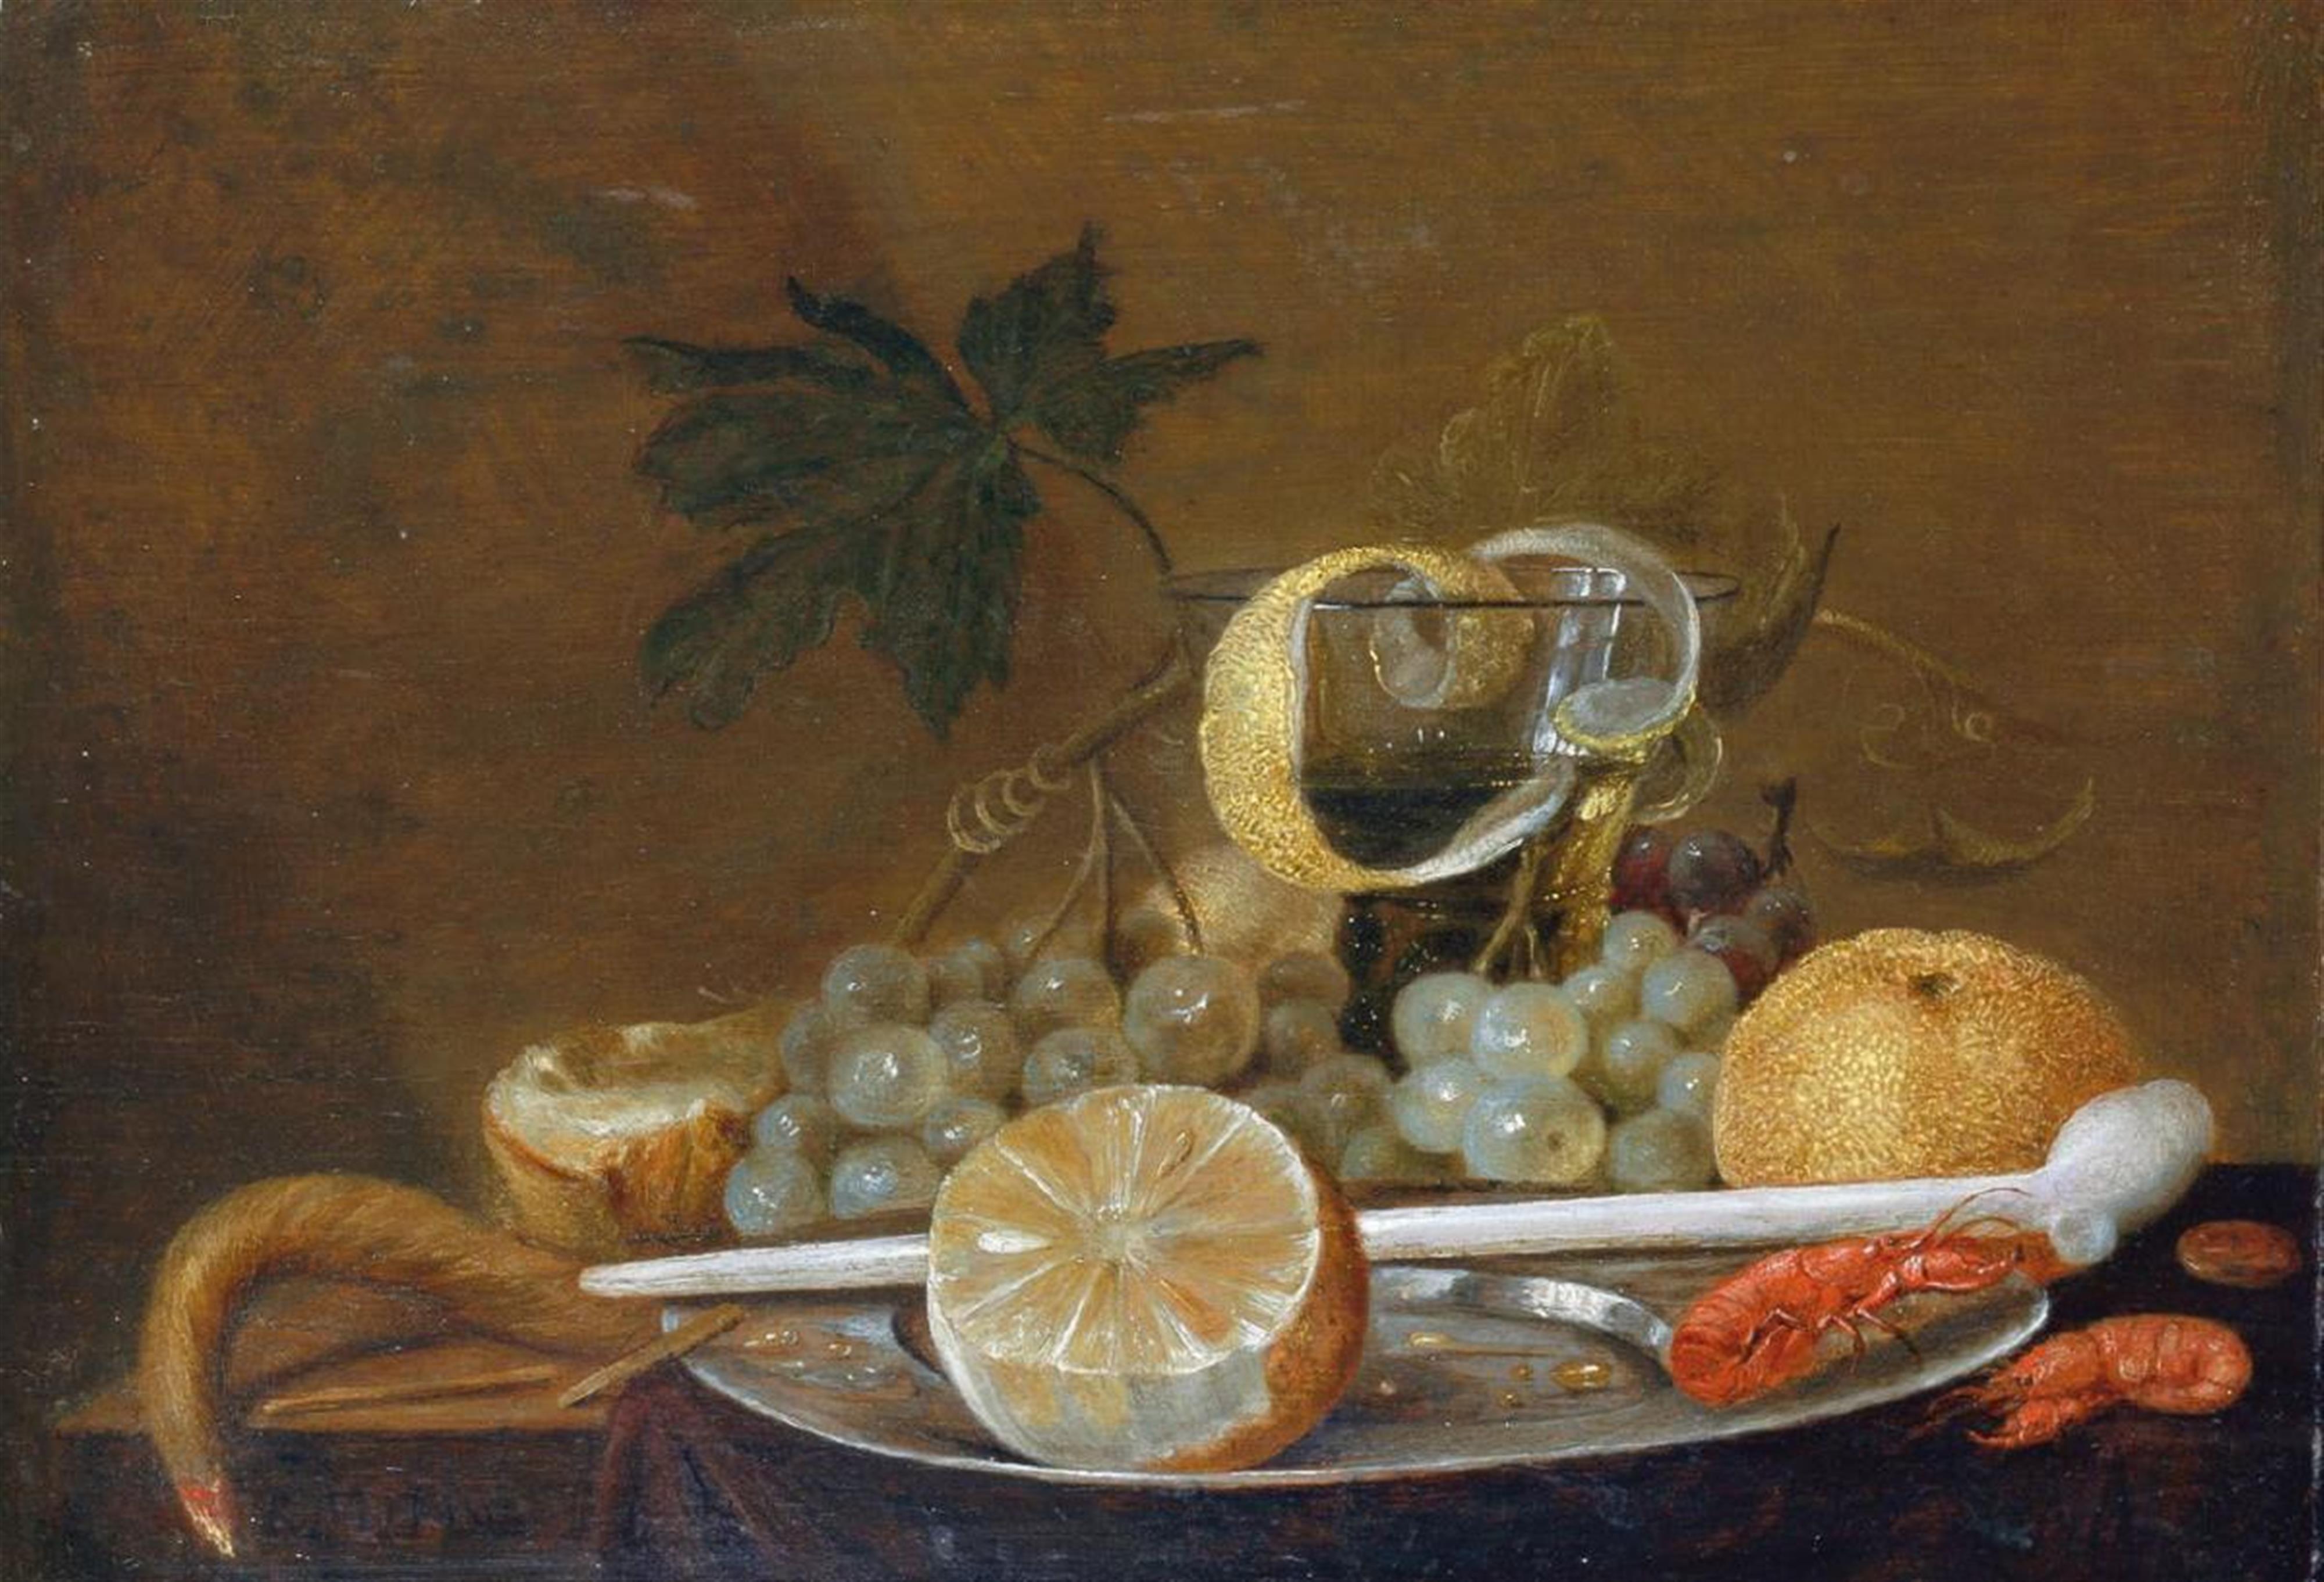 Cornelis Mahu - STILL LIFE WITH FRUITS, BOILED CRABS AND A PIPE - image-1